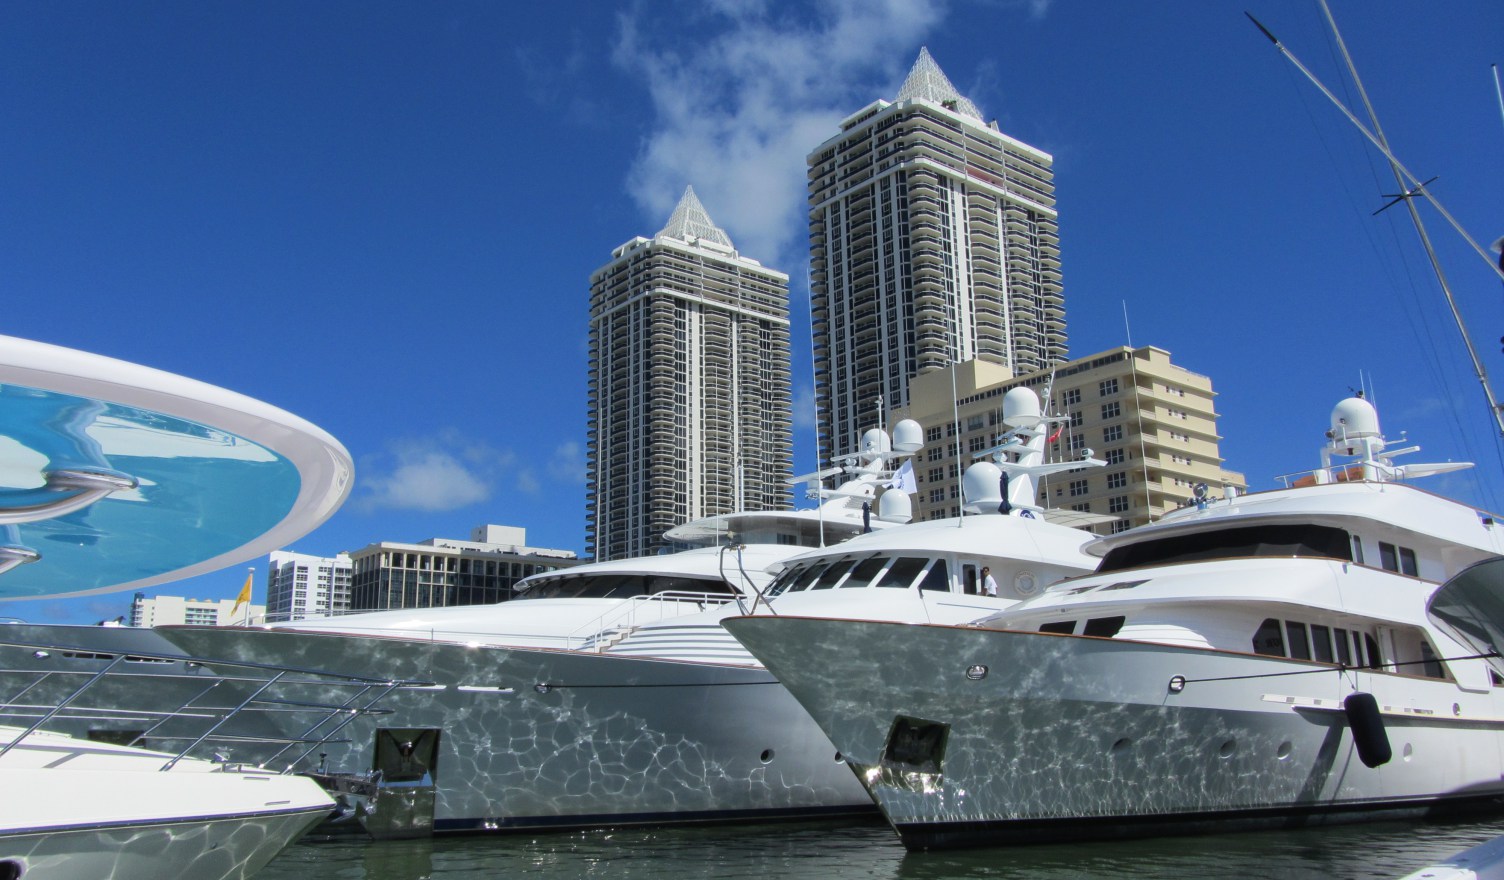 Miami International Boat Show and the Miami Yacht Show: Highlights you Can’t-Miss